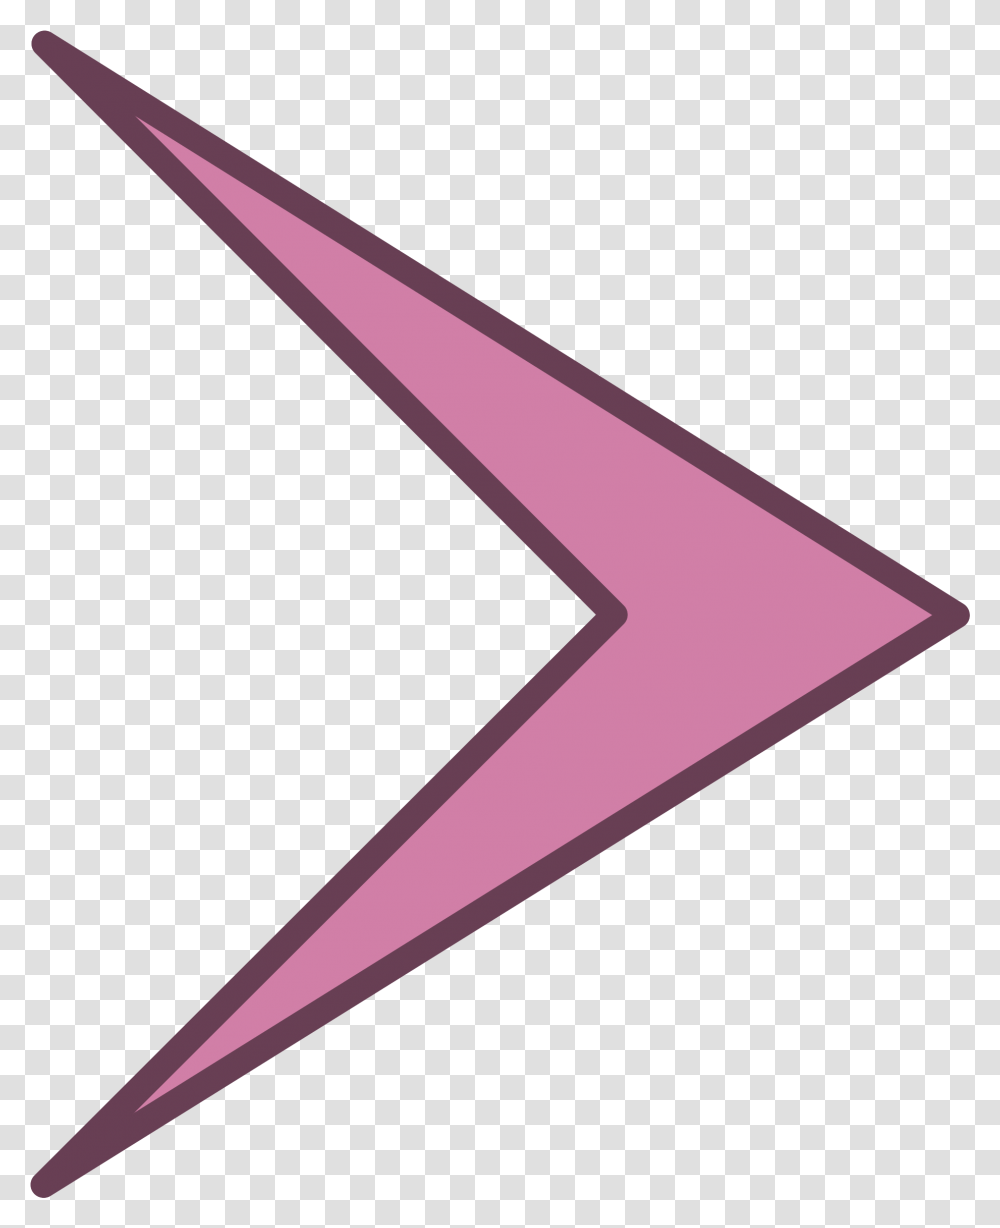 Library Of Arrow Head Vector Freeuse Shape That Looks Like An Arrow, Triangle, Cone, Arrowhead, Projection Screen Transparent Png